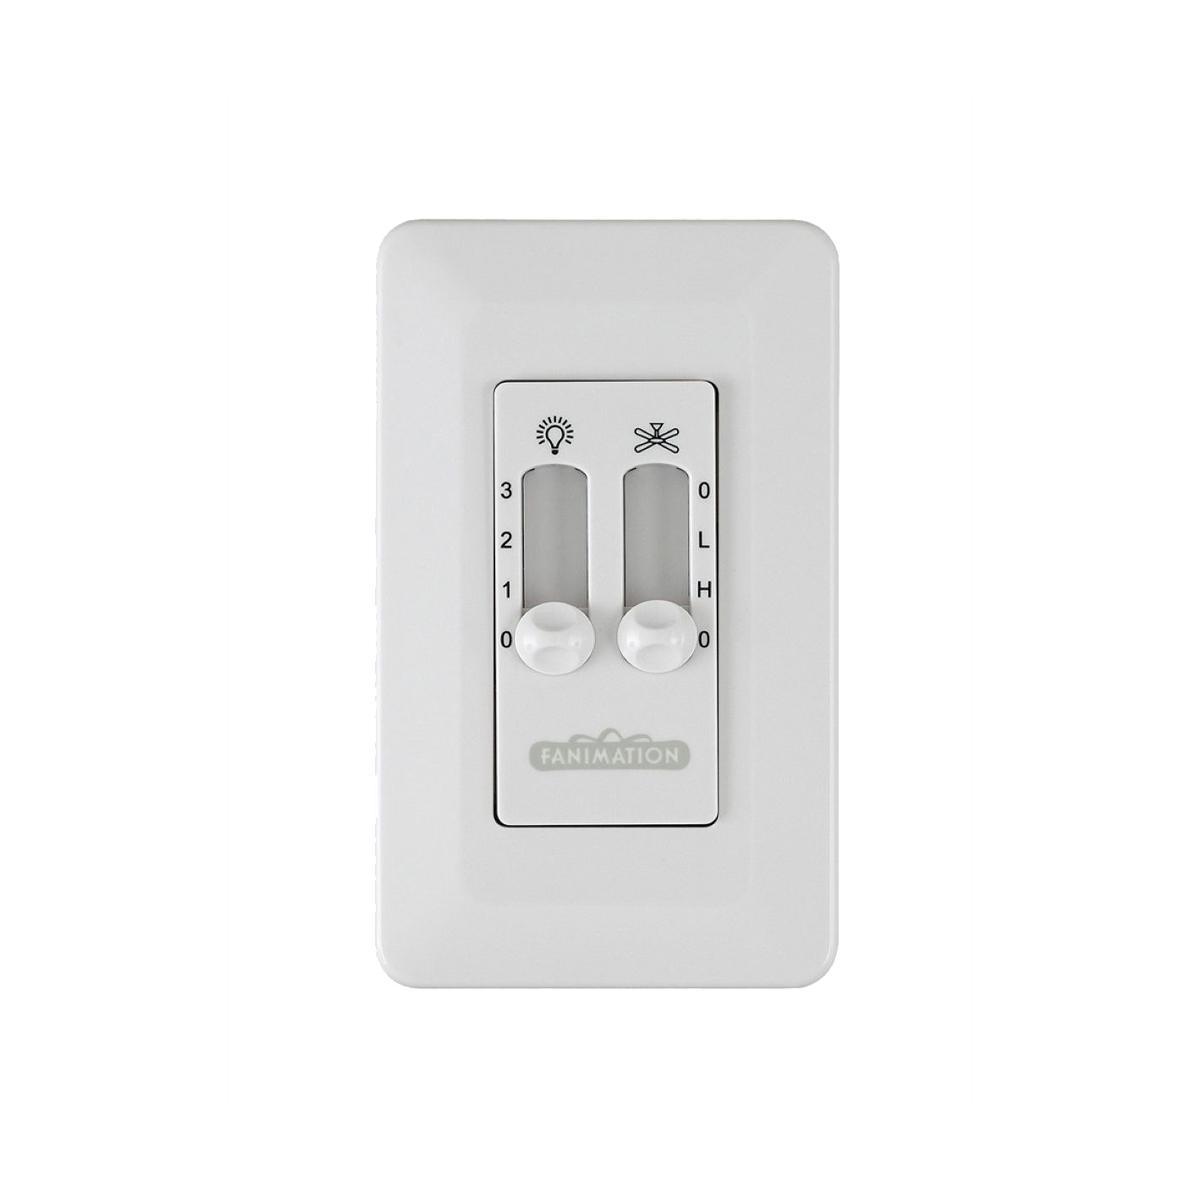 2-Speed Ceiling Fan And Light Wall Control, White Finish